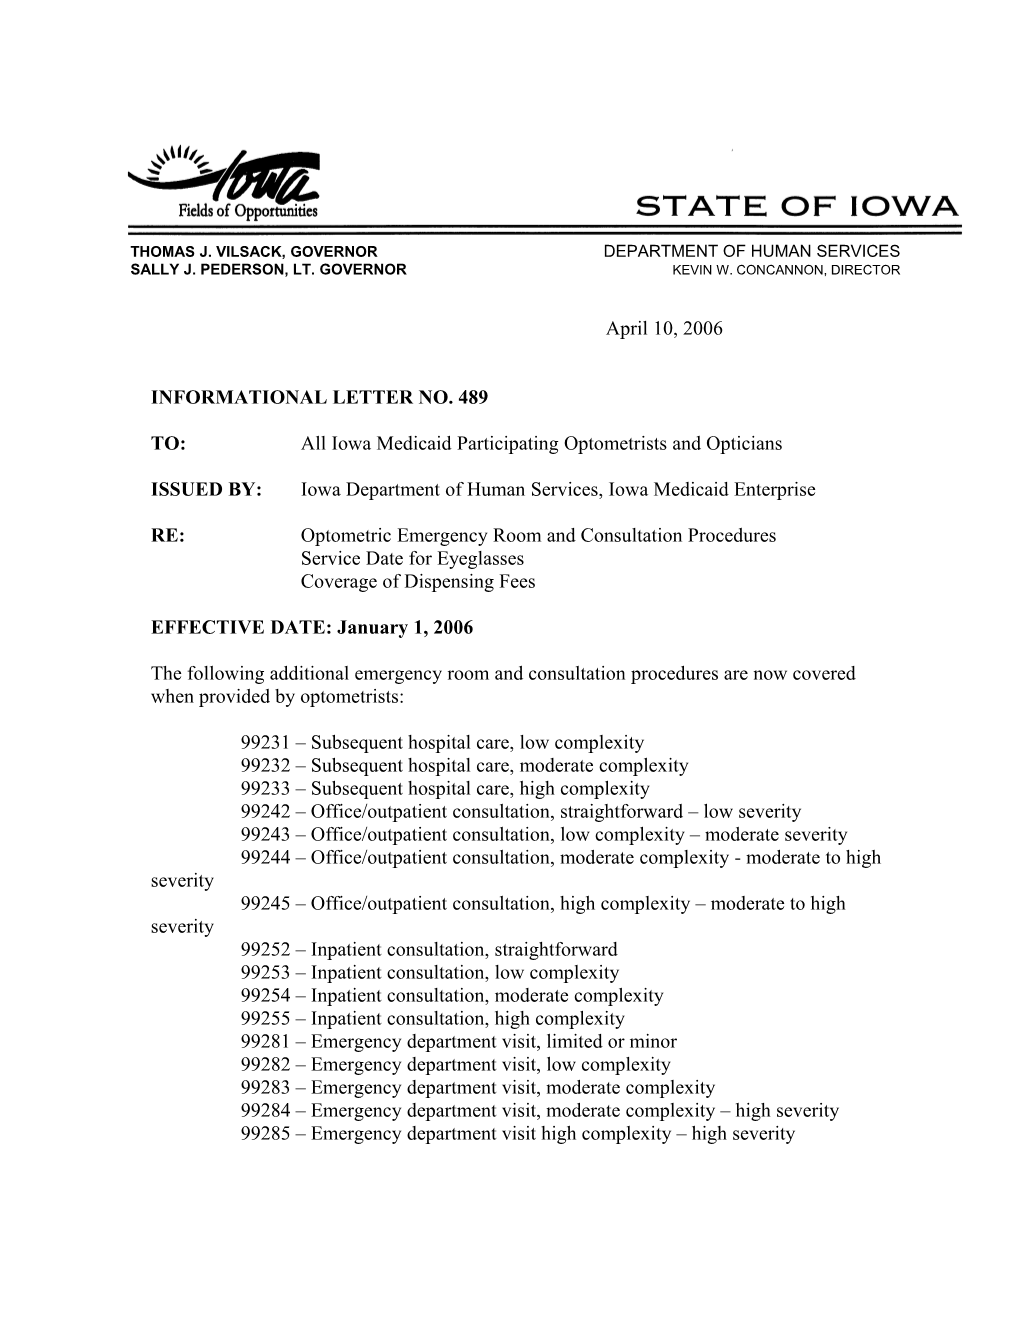 Department of Human Services Letterhead s2